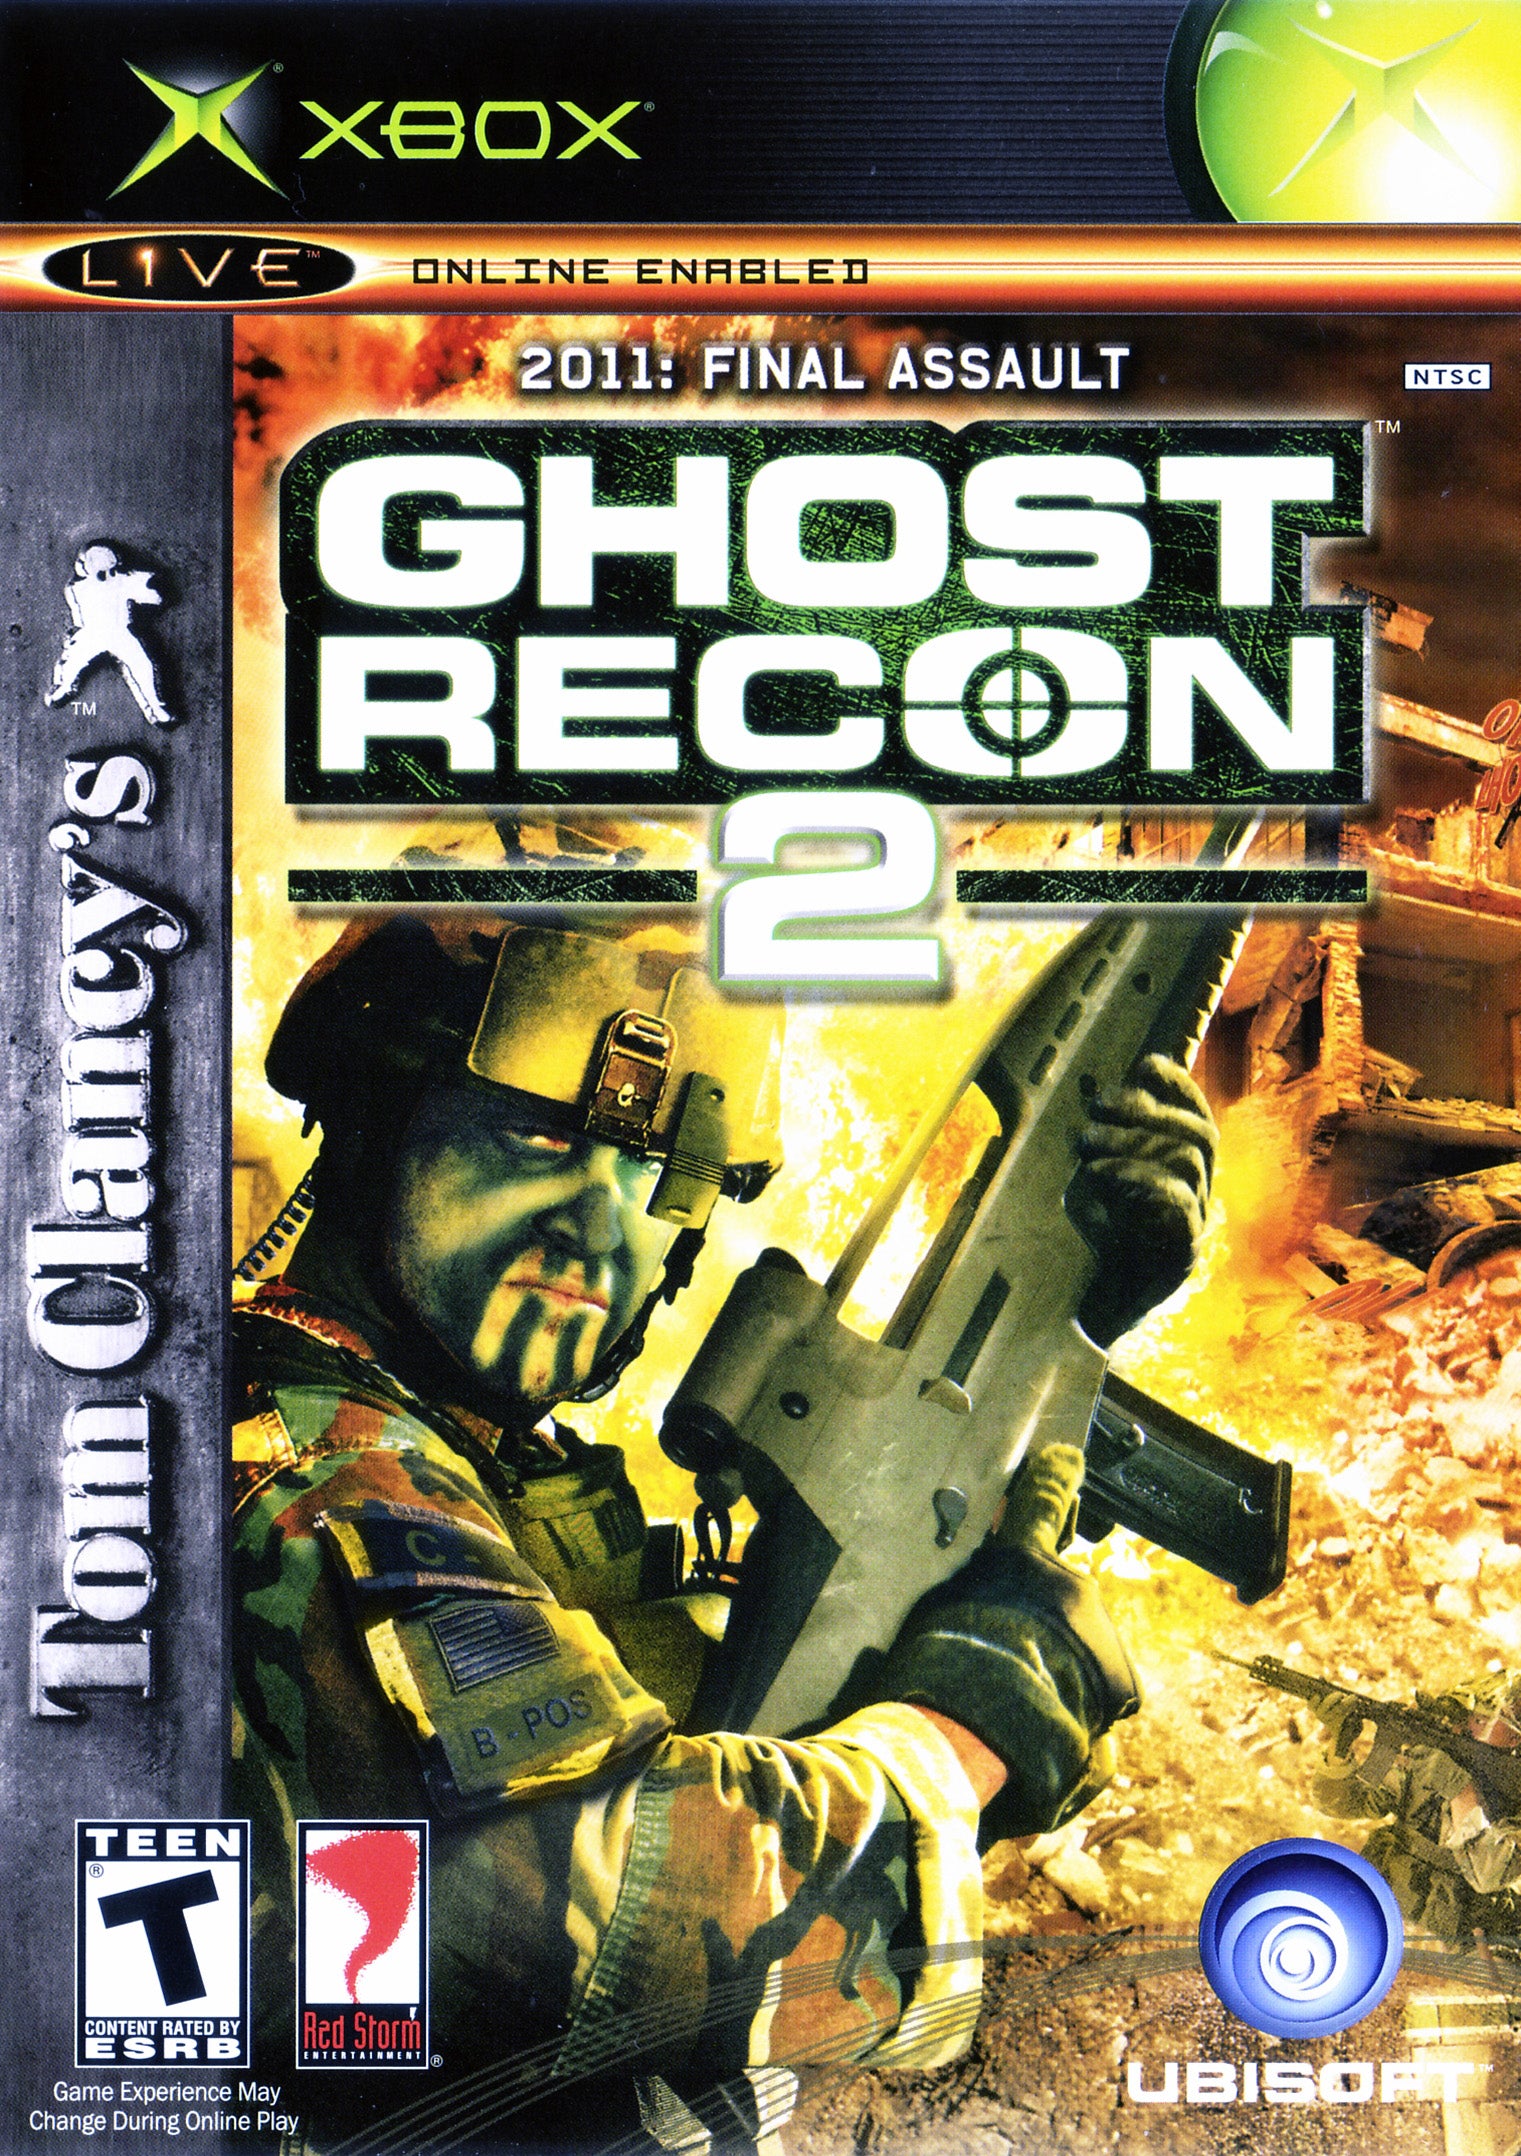 Tom Clancy's Ghost Recon 2 - Microsoft Xbox Game